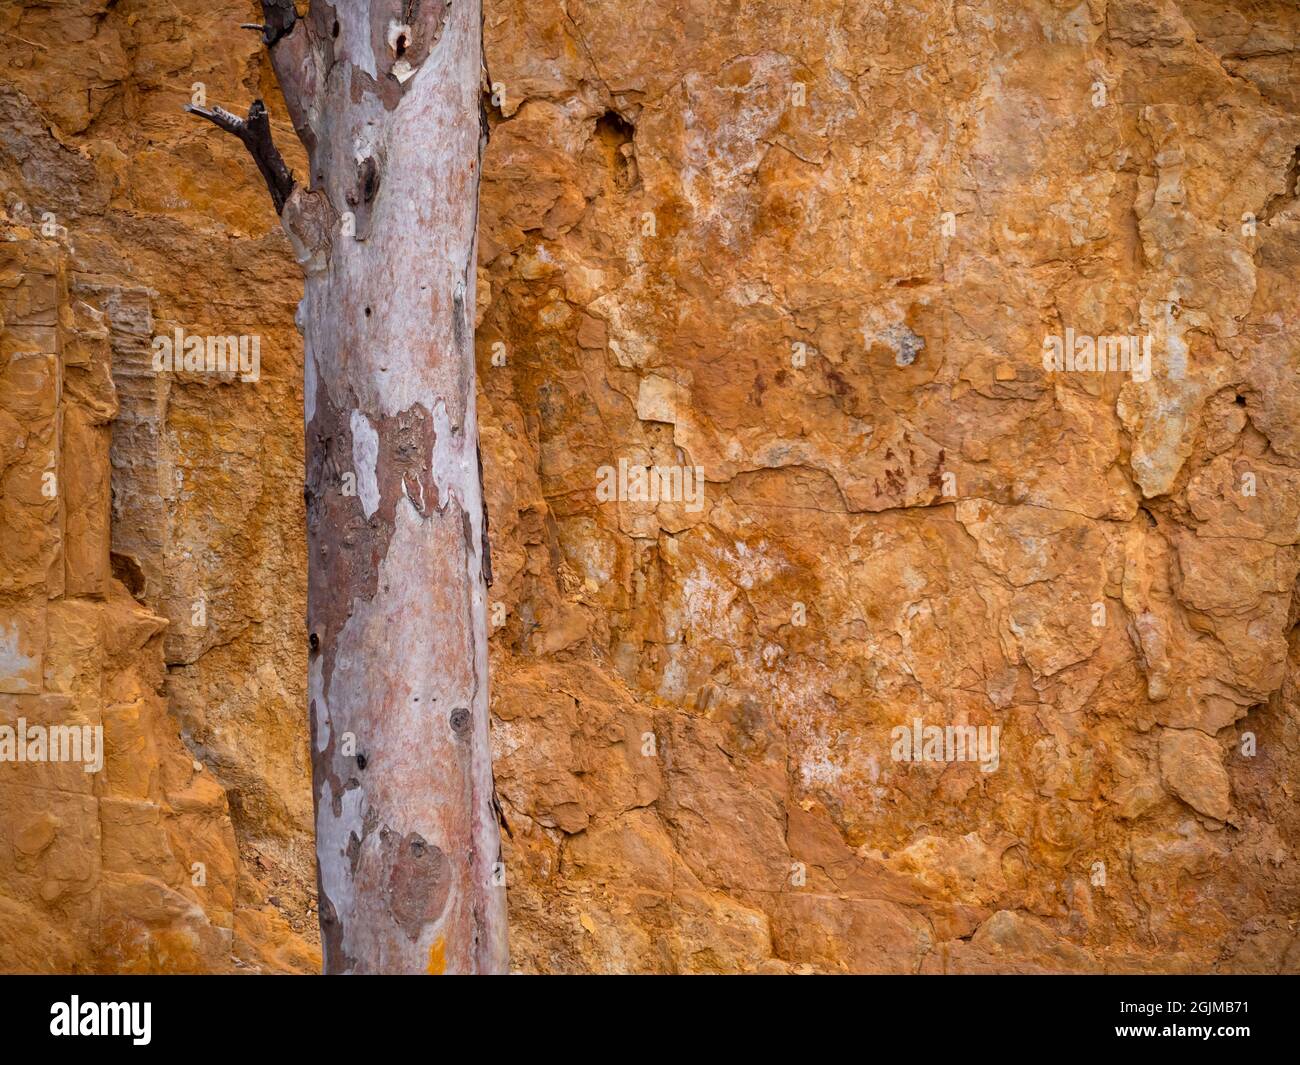 Eucalyptus gum tree trunk and red orange cliff background typical of arid, desert Central Australia, background. Stock Photo